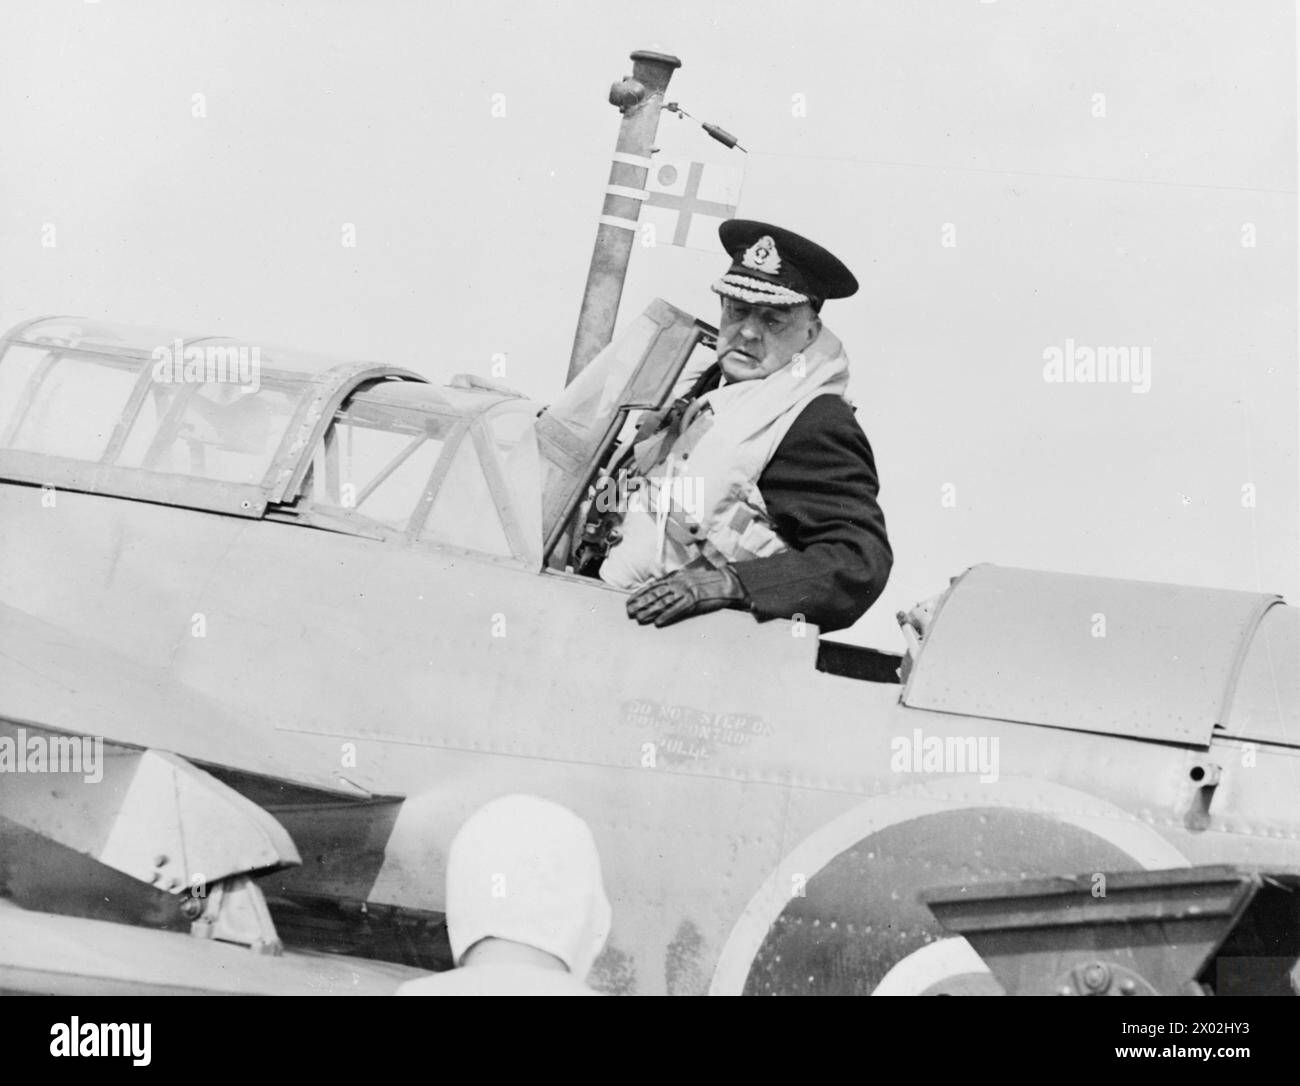 FLYING ADMIRAL. MAY 1945, HMS PEEWIT, ROYAL NAVAL AIR STATION, EAST HAVEN, NEAR ARBROATH. VICE ADMIRAL SIR A L ST G LYSTER, KCB, CVO, CBE, DSO, FLAG OFFICER IN CHARGE OF CARRIER TRAINING, AS HE PREPARED TO MAKE A FLYING VISIT TO THE BRITISH ESCORT CARRIER HMS SMITER. IT WOULD BE HIS 107TH DECK LANDING, AND HE HAS LANDED ON OVER 50 CARRIERS. - Vice Admiral Lyster entering the Fairey Barracuda at HMS PEEWIT. Note the Admiral's flag on the aircraft Stock Photo